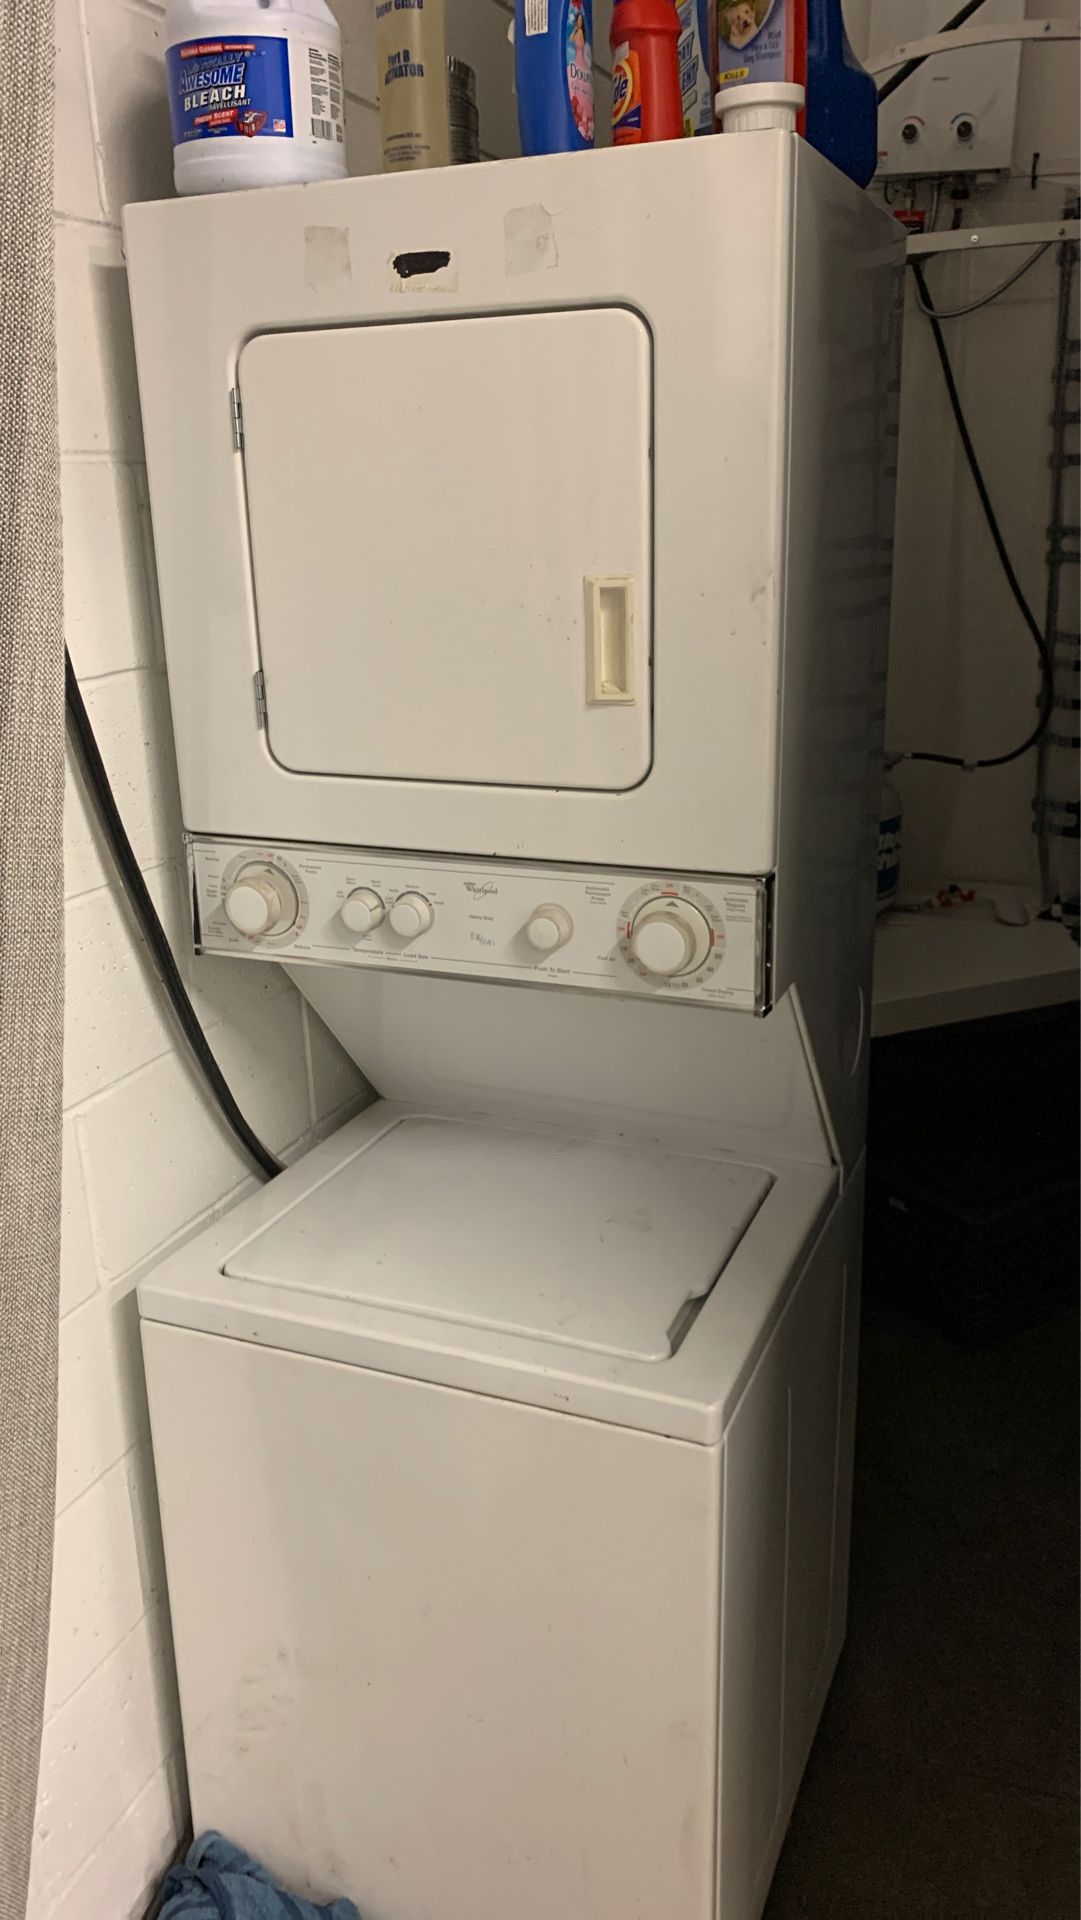 Stand alone washer dryer